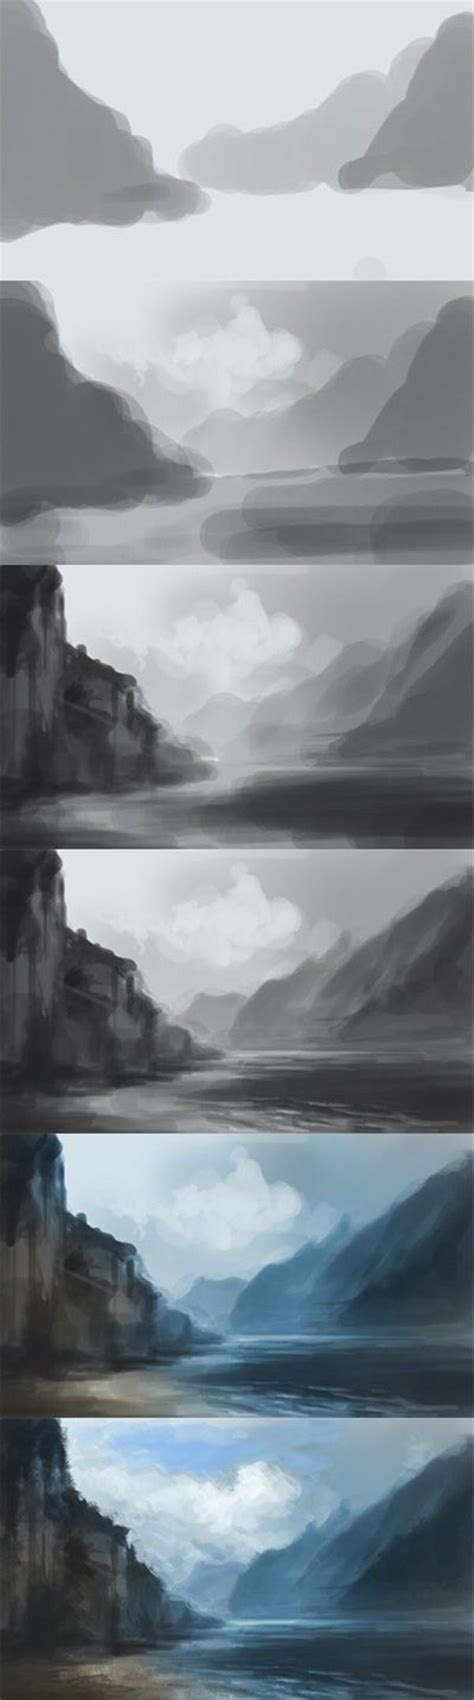 60 Easy And Simple Landscape Painting Ideas Digital Painting